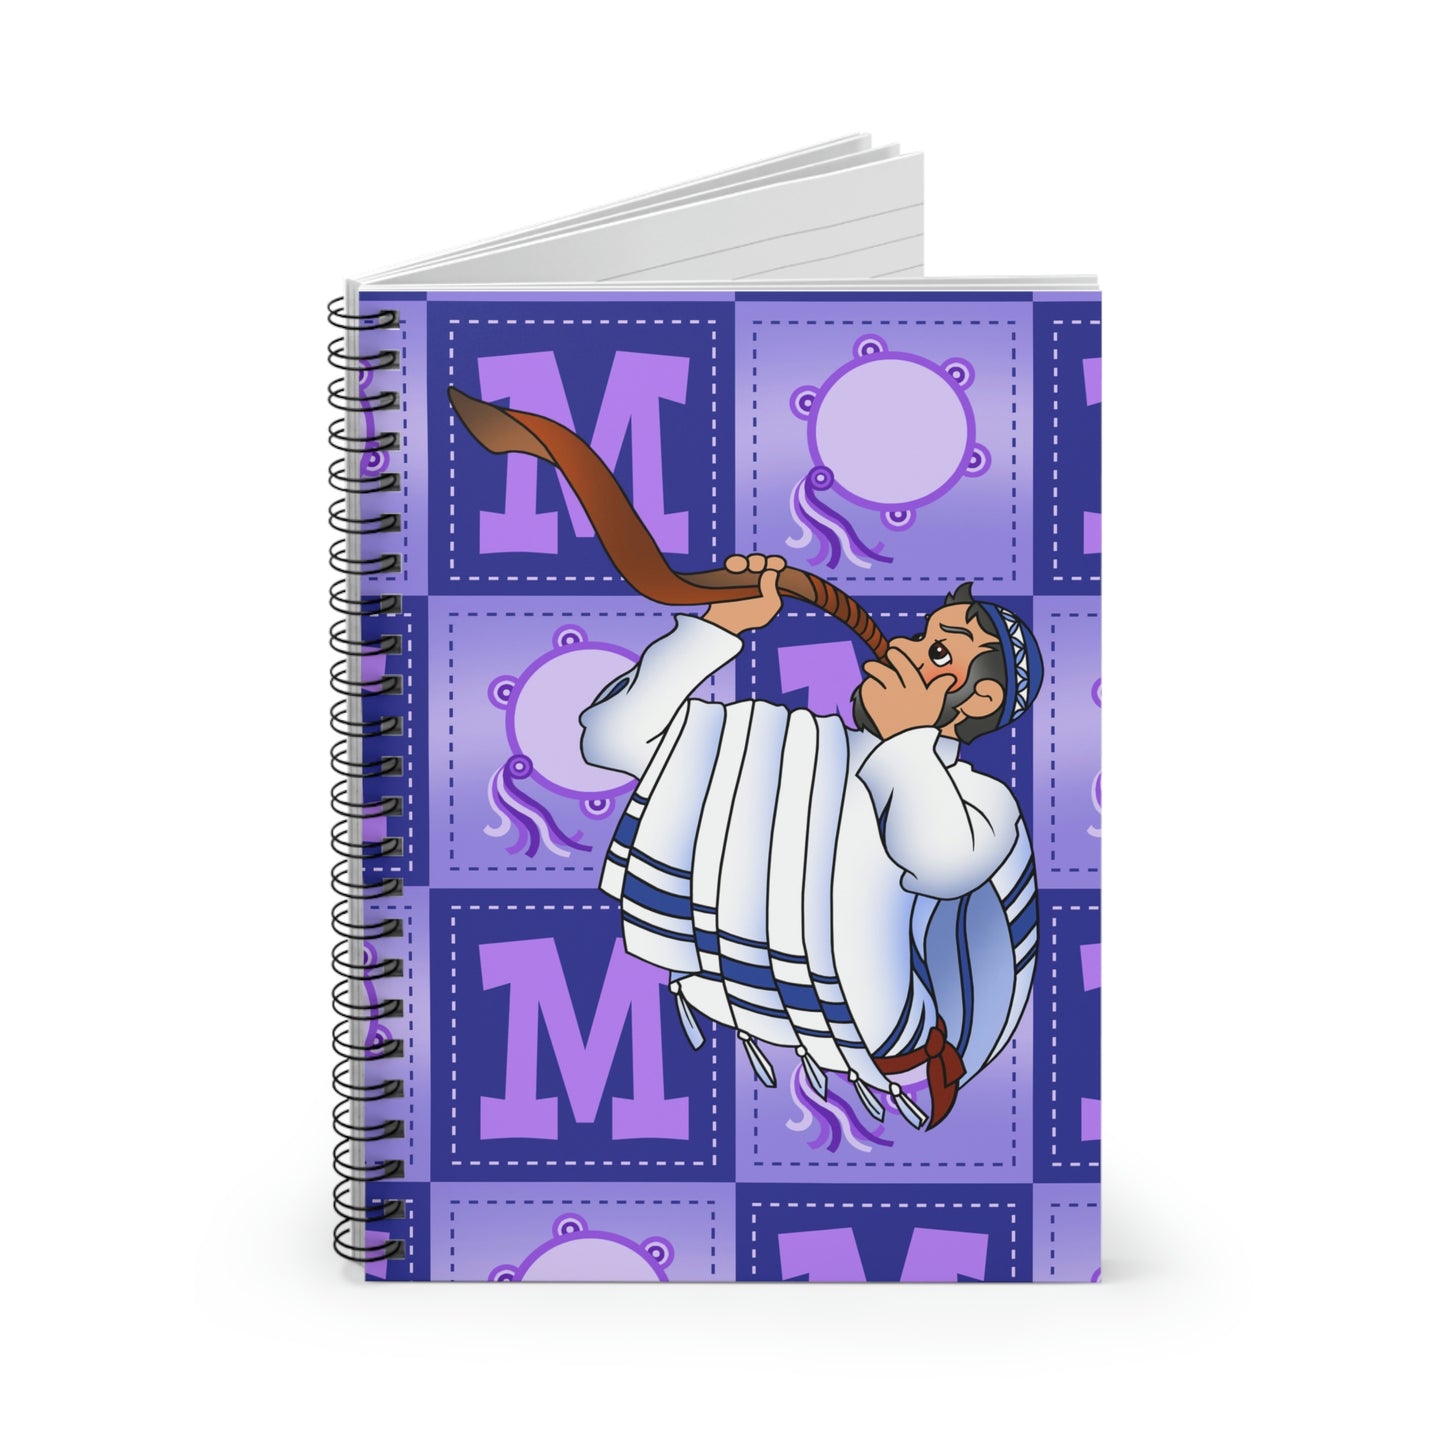 The Bible as Simple as ABC M Spiral Notebook - Ruled Line